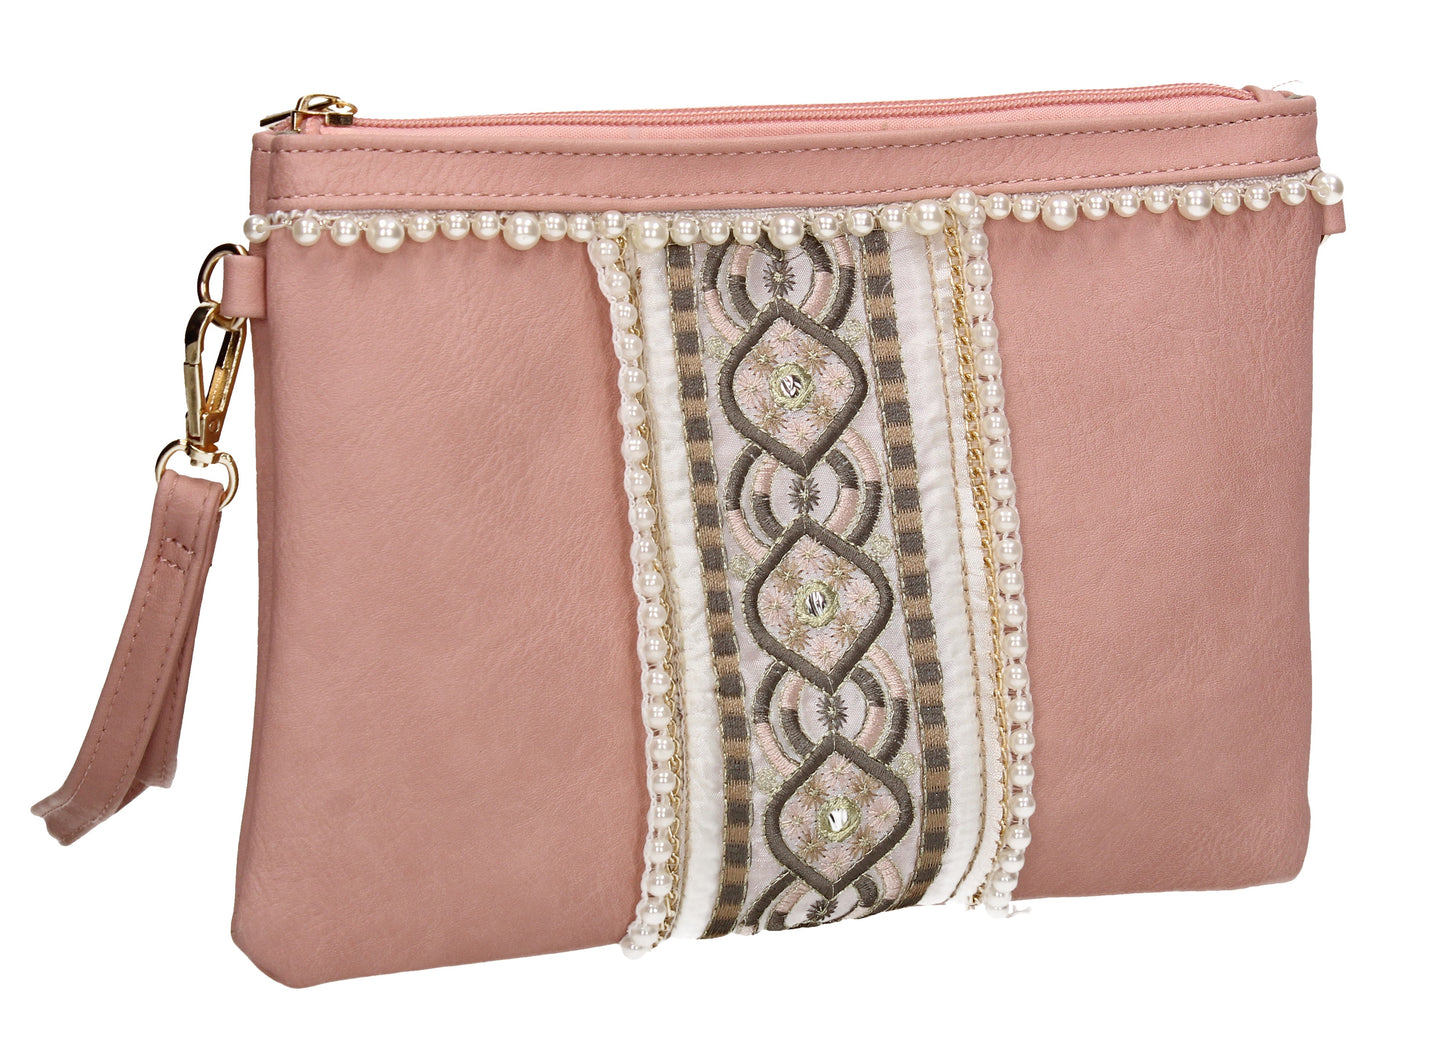 SWANKYSWANS Delilah Clutch Bag Pale Pink Cute Cheap Clutch Bag For Weddings School and Work